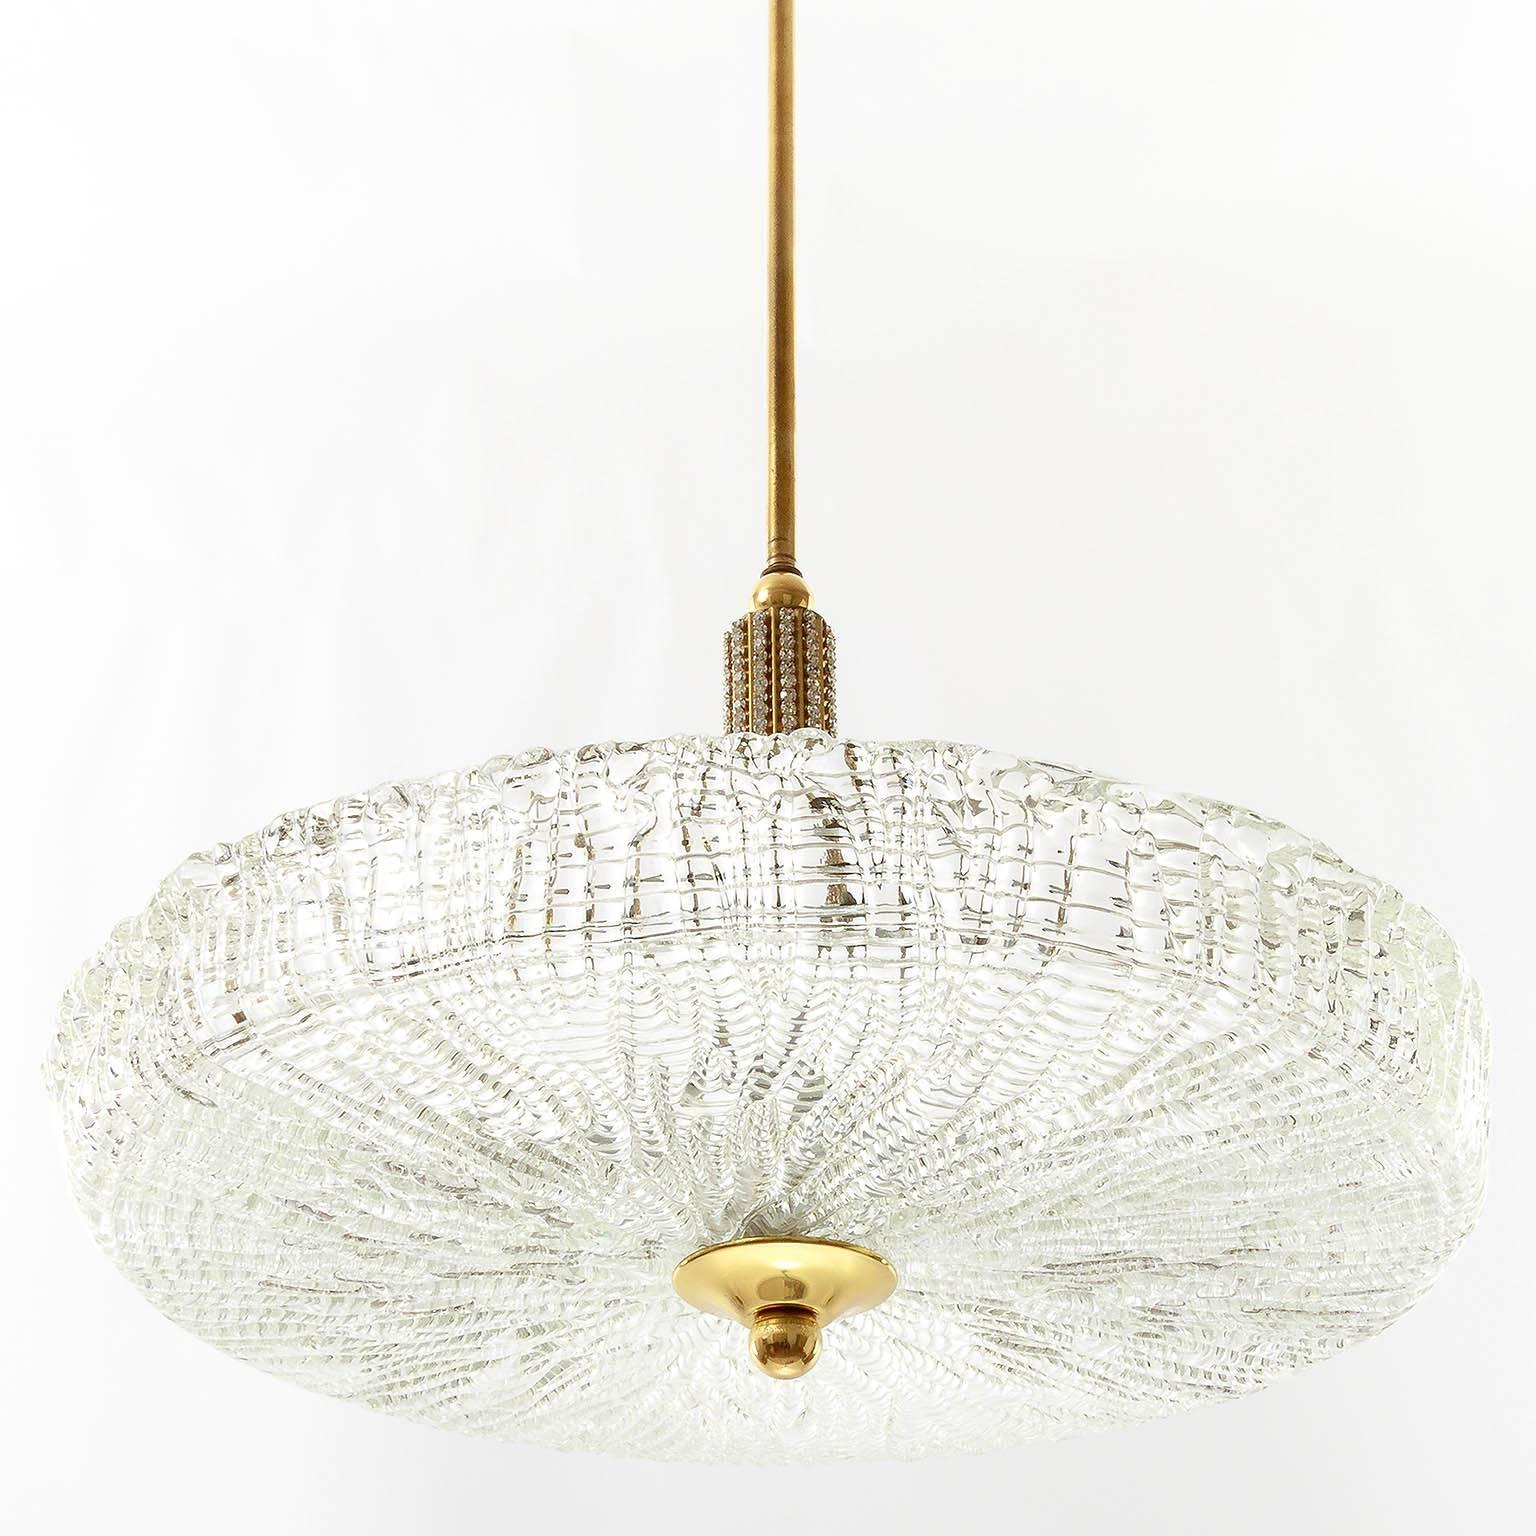 A beautiful chandelier made of textured glass, brass and small crystals. It is in the style of Austrian makers like Nikoll, Kalmar and Bakalowits or Swedish maker Orrefors (Carl Fagerlund).

Six small base bulbs (max. 40W each). Flat and wide US